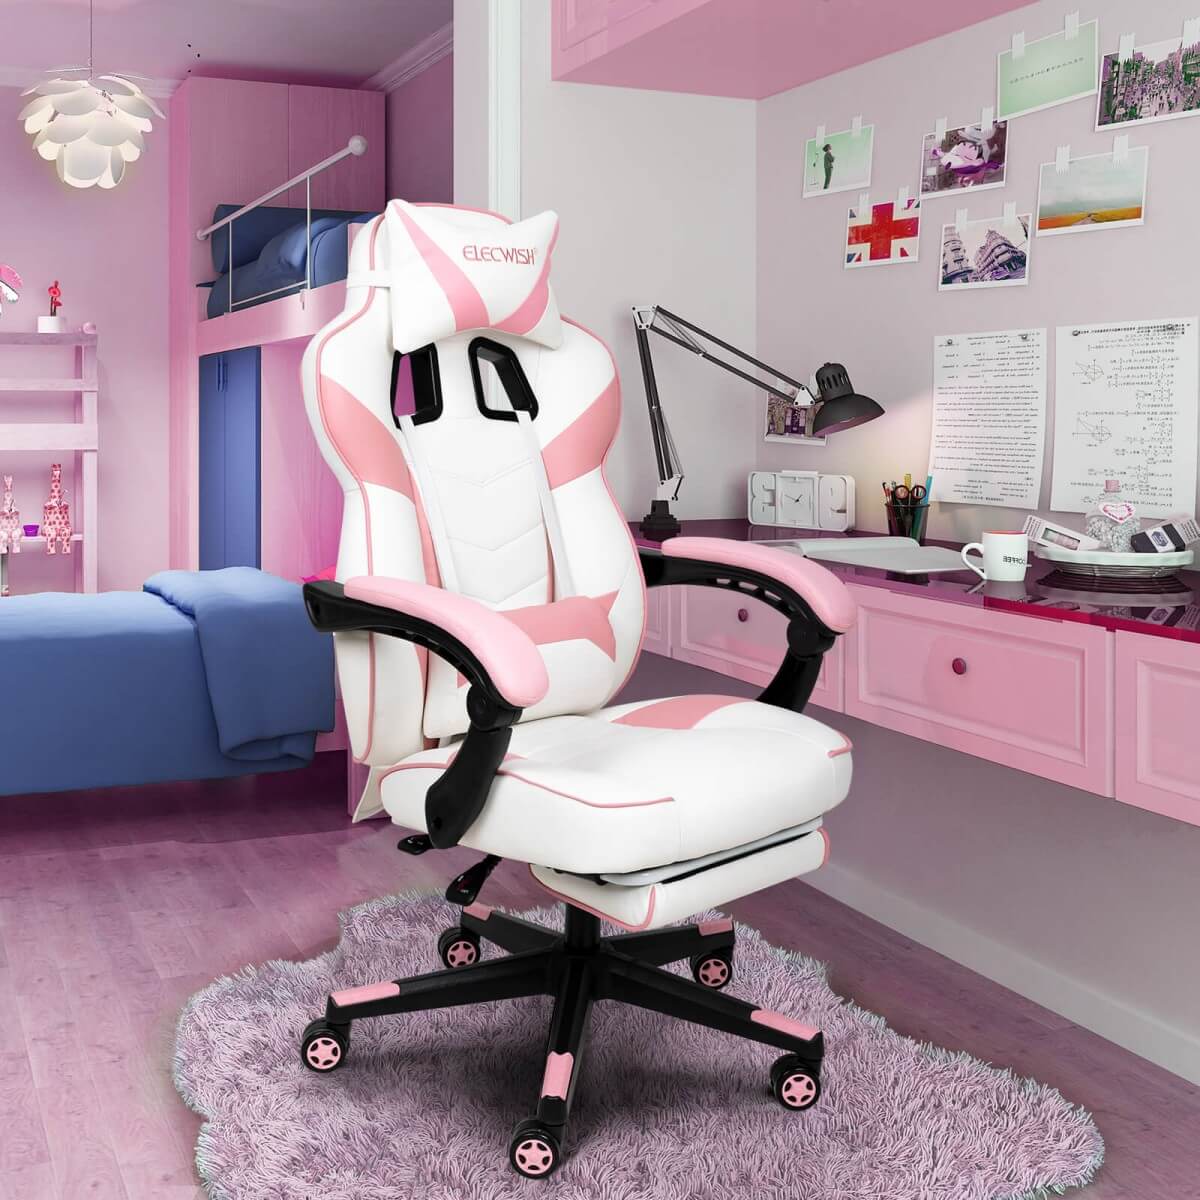 Elecwish Video Game Chairs Pink Gaming Chair With Footrest OC087 displays situation